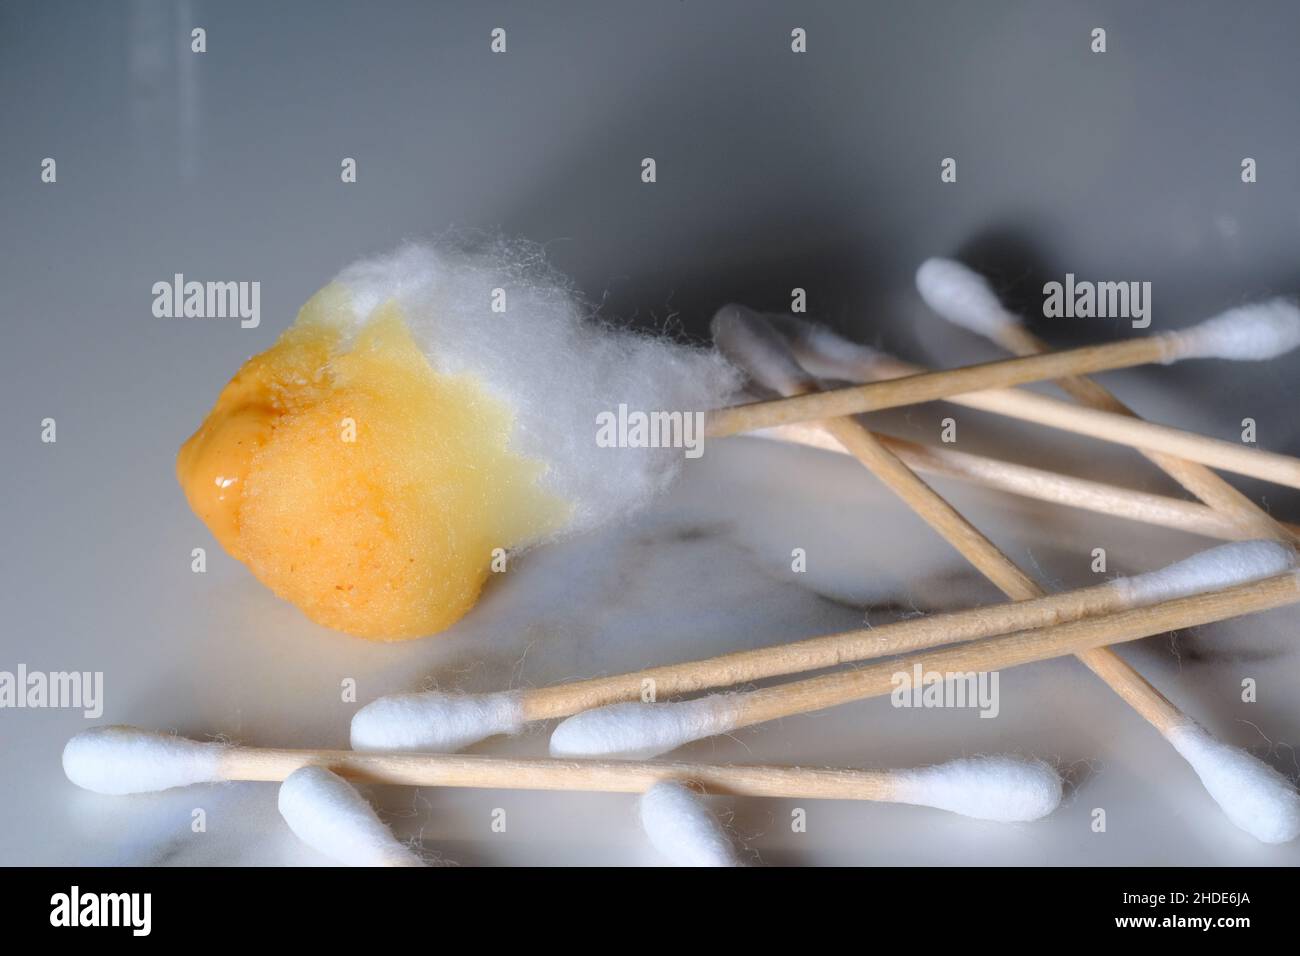 Cleaning extreme amount of ear wax using cotton swabs Stock Photo